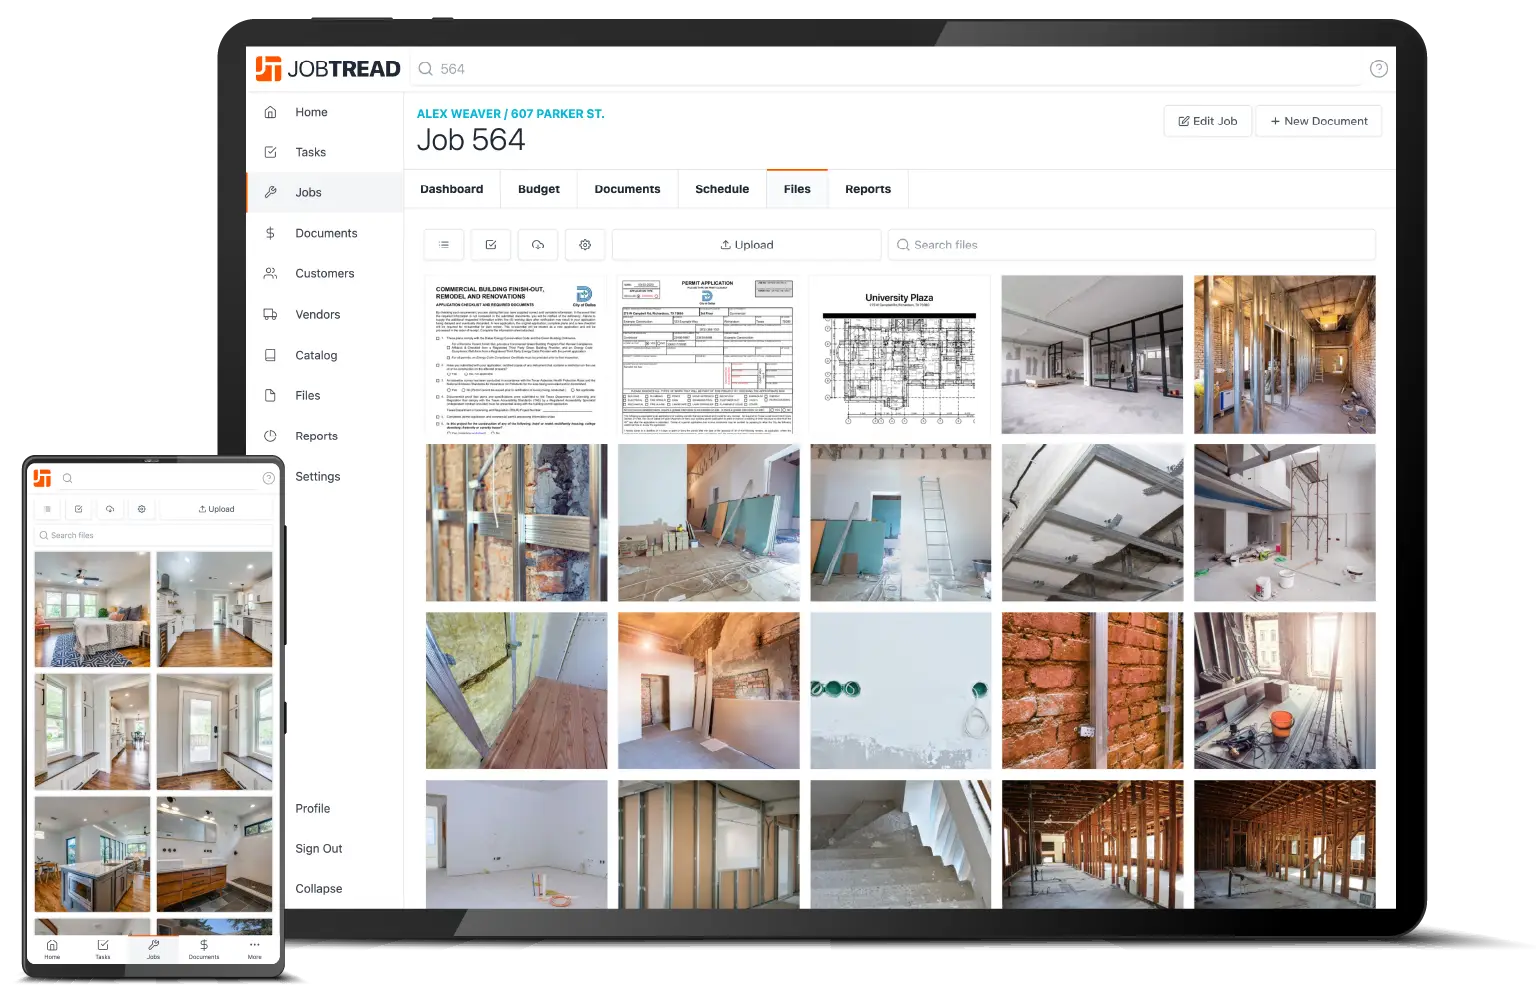 JobTread Construction Software - managing construction job photos, videos, documents and other files